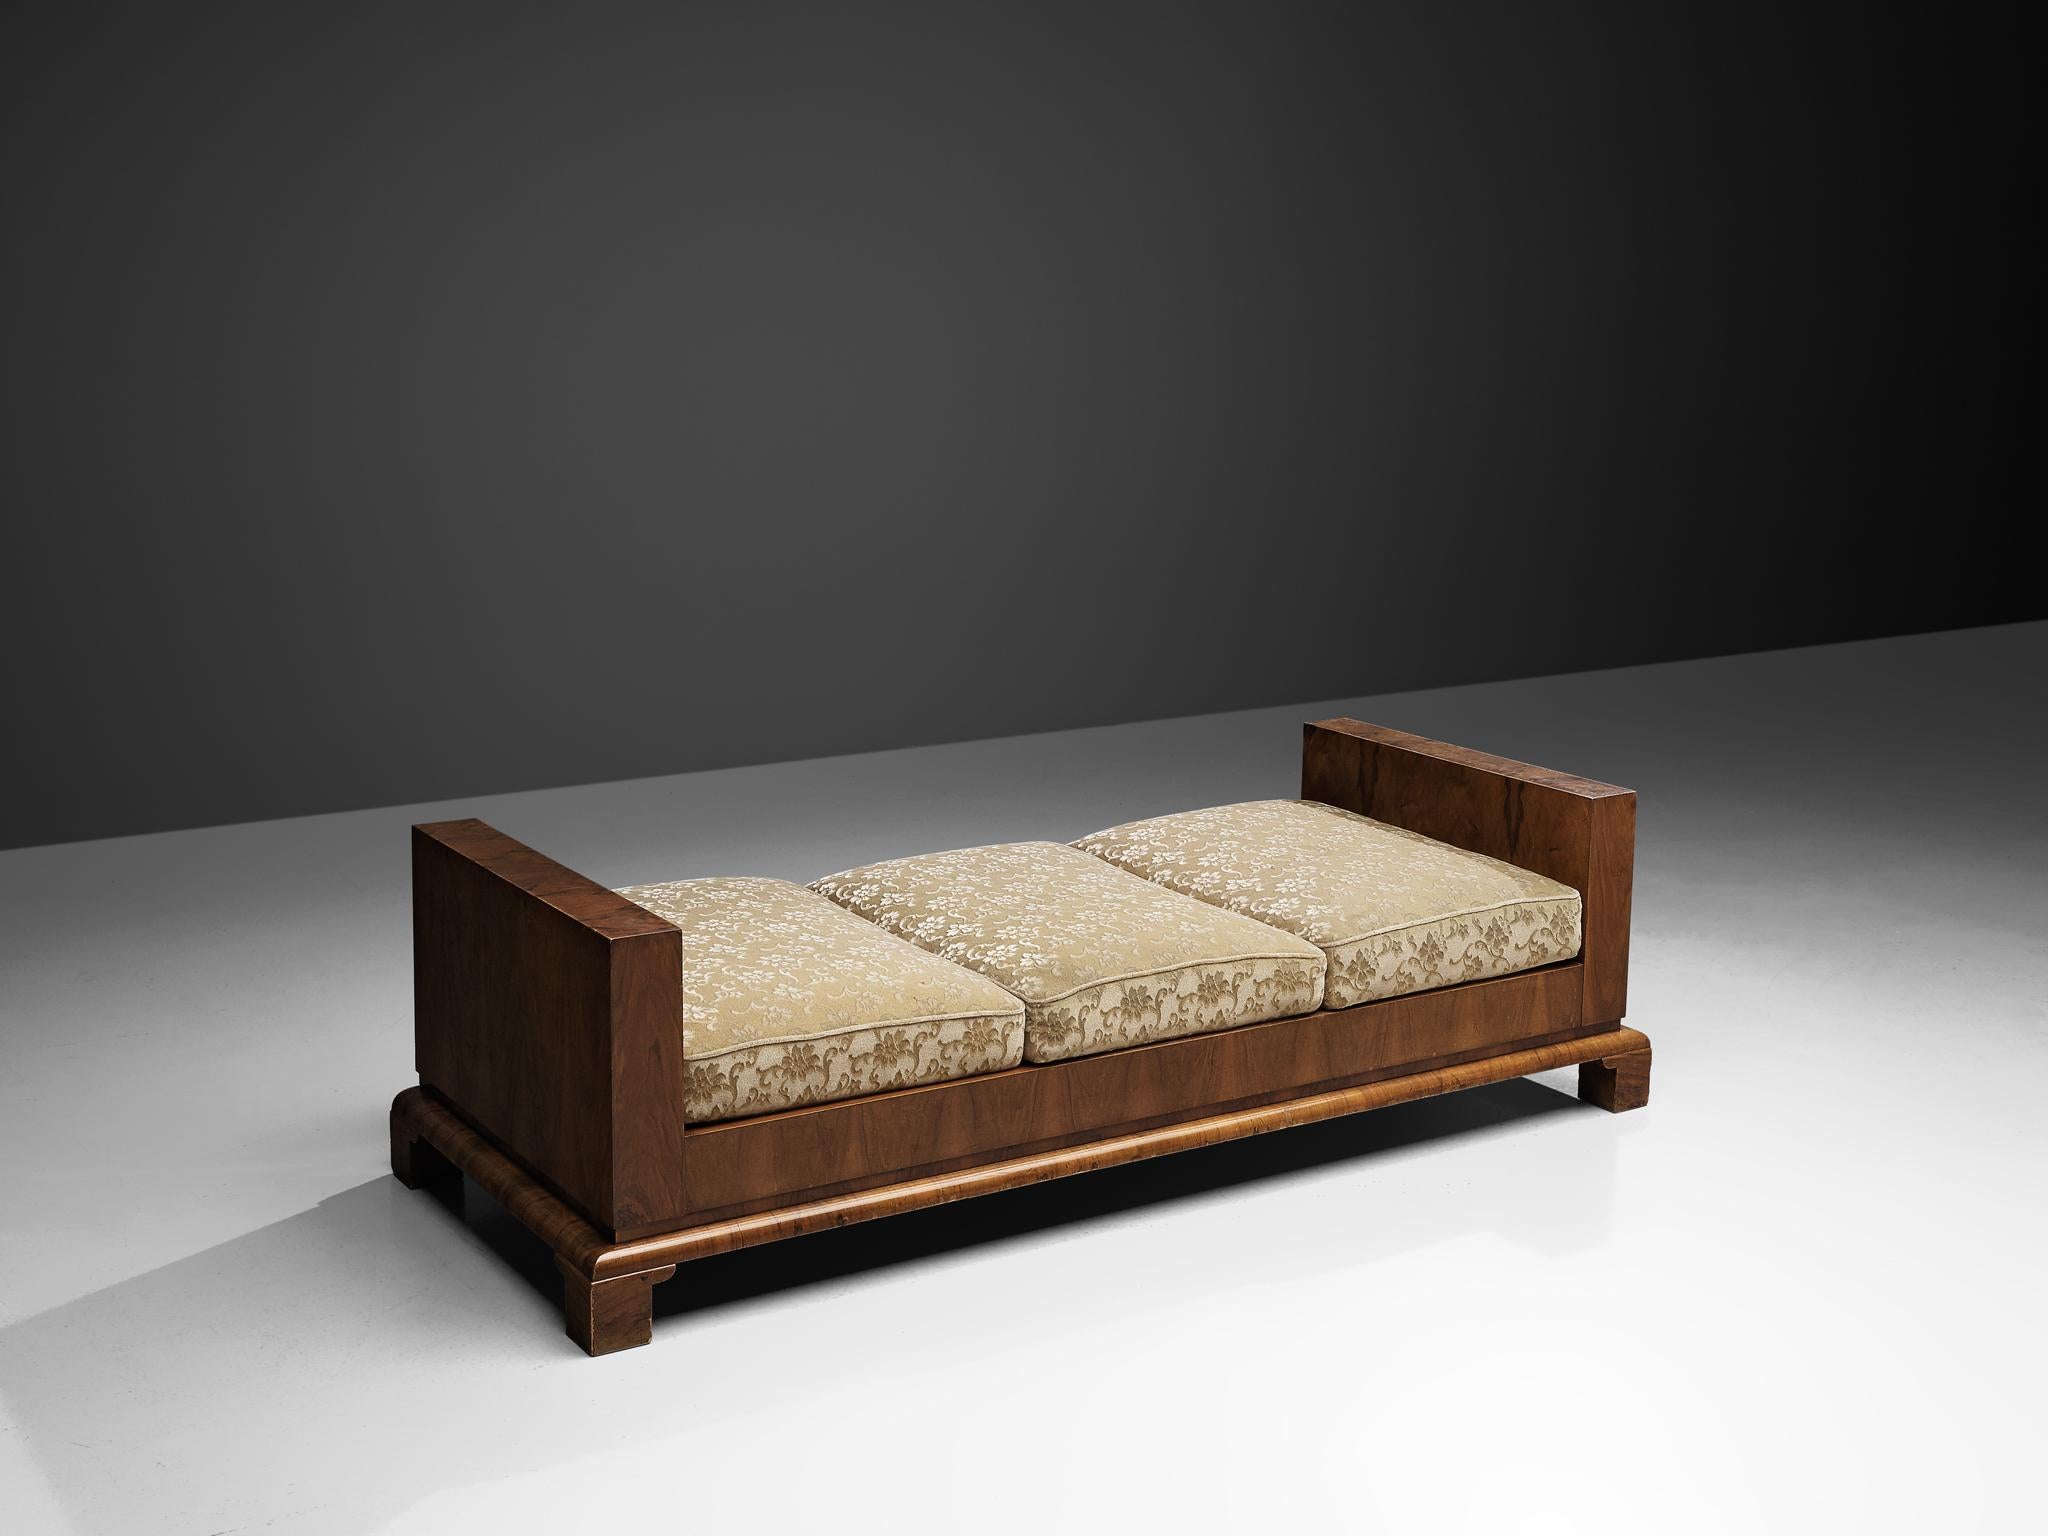 Daybed, walnut and fabric, Italy, 1930s

An Art Deco sofa-bed, featuring a sturdy, masculine walnut veneered frame. The legs are short and form a balanced whole with the stately, robust lines of the daybed. The cushions can be arranged on the side